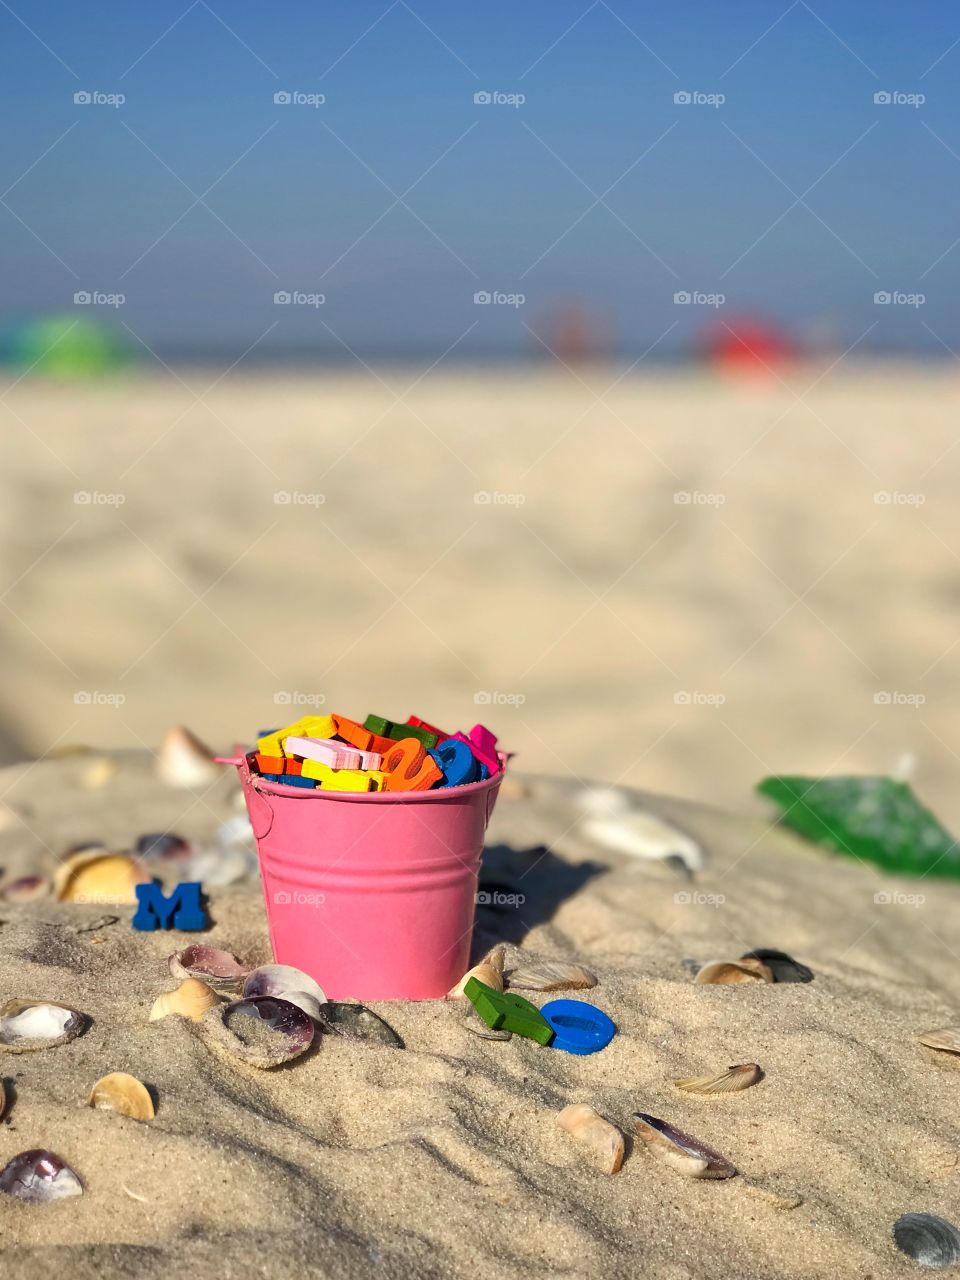 pink baby iron bucket filled with wooden colorful letters stands on the sand on the background of the sea